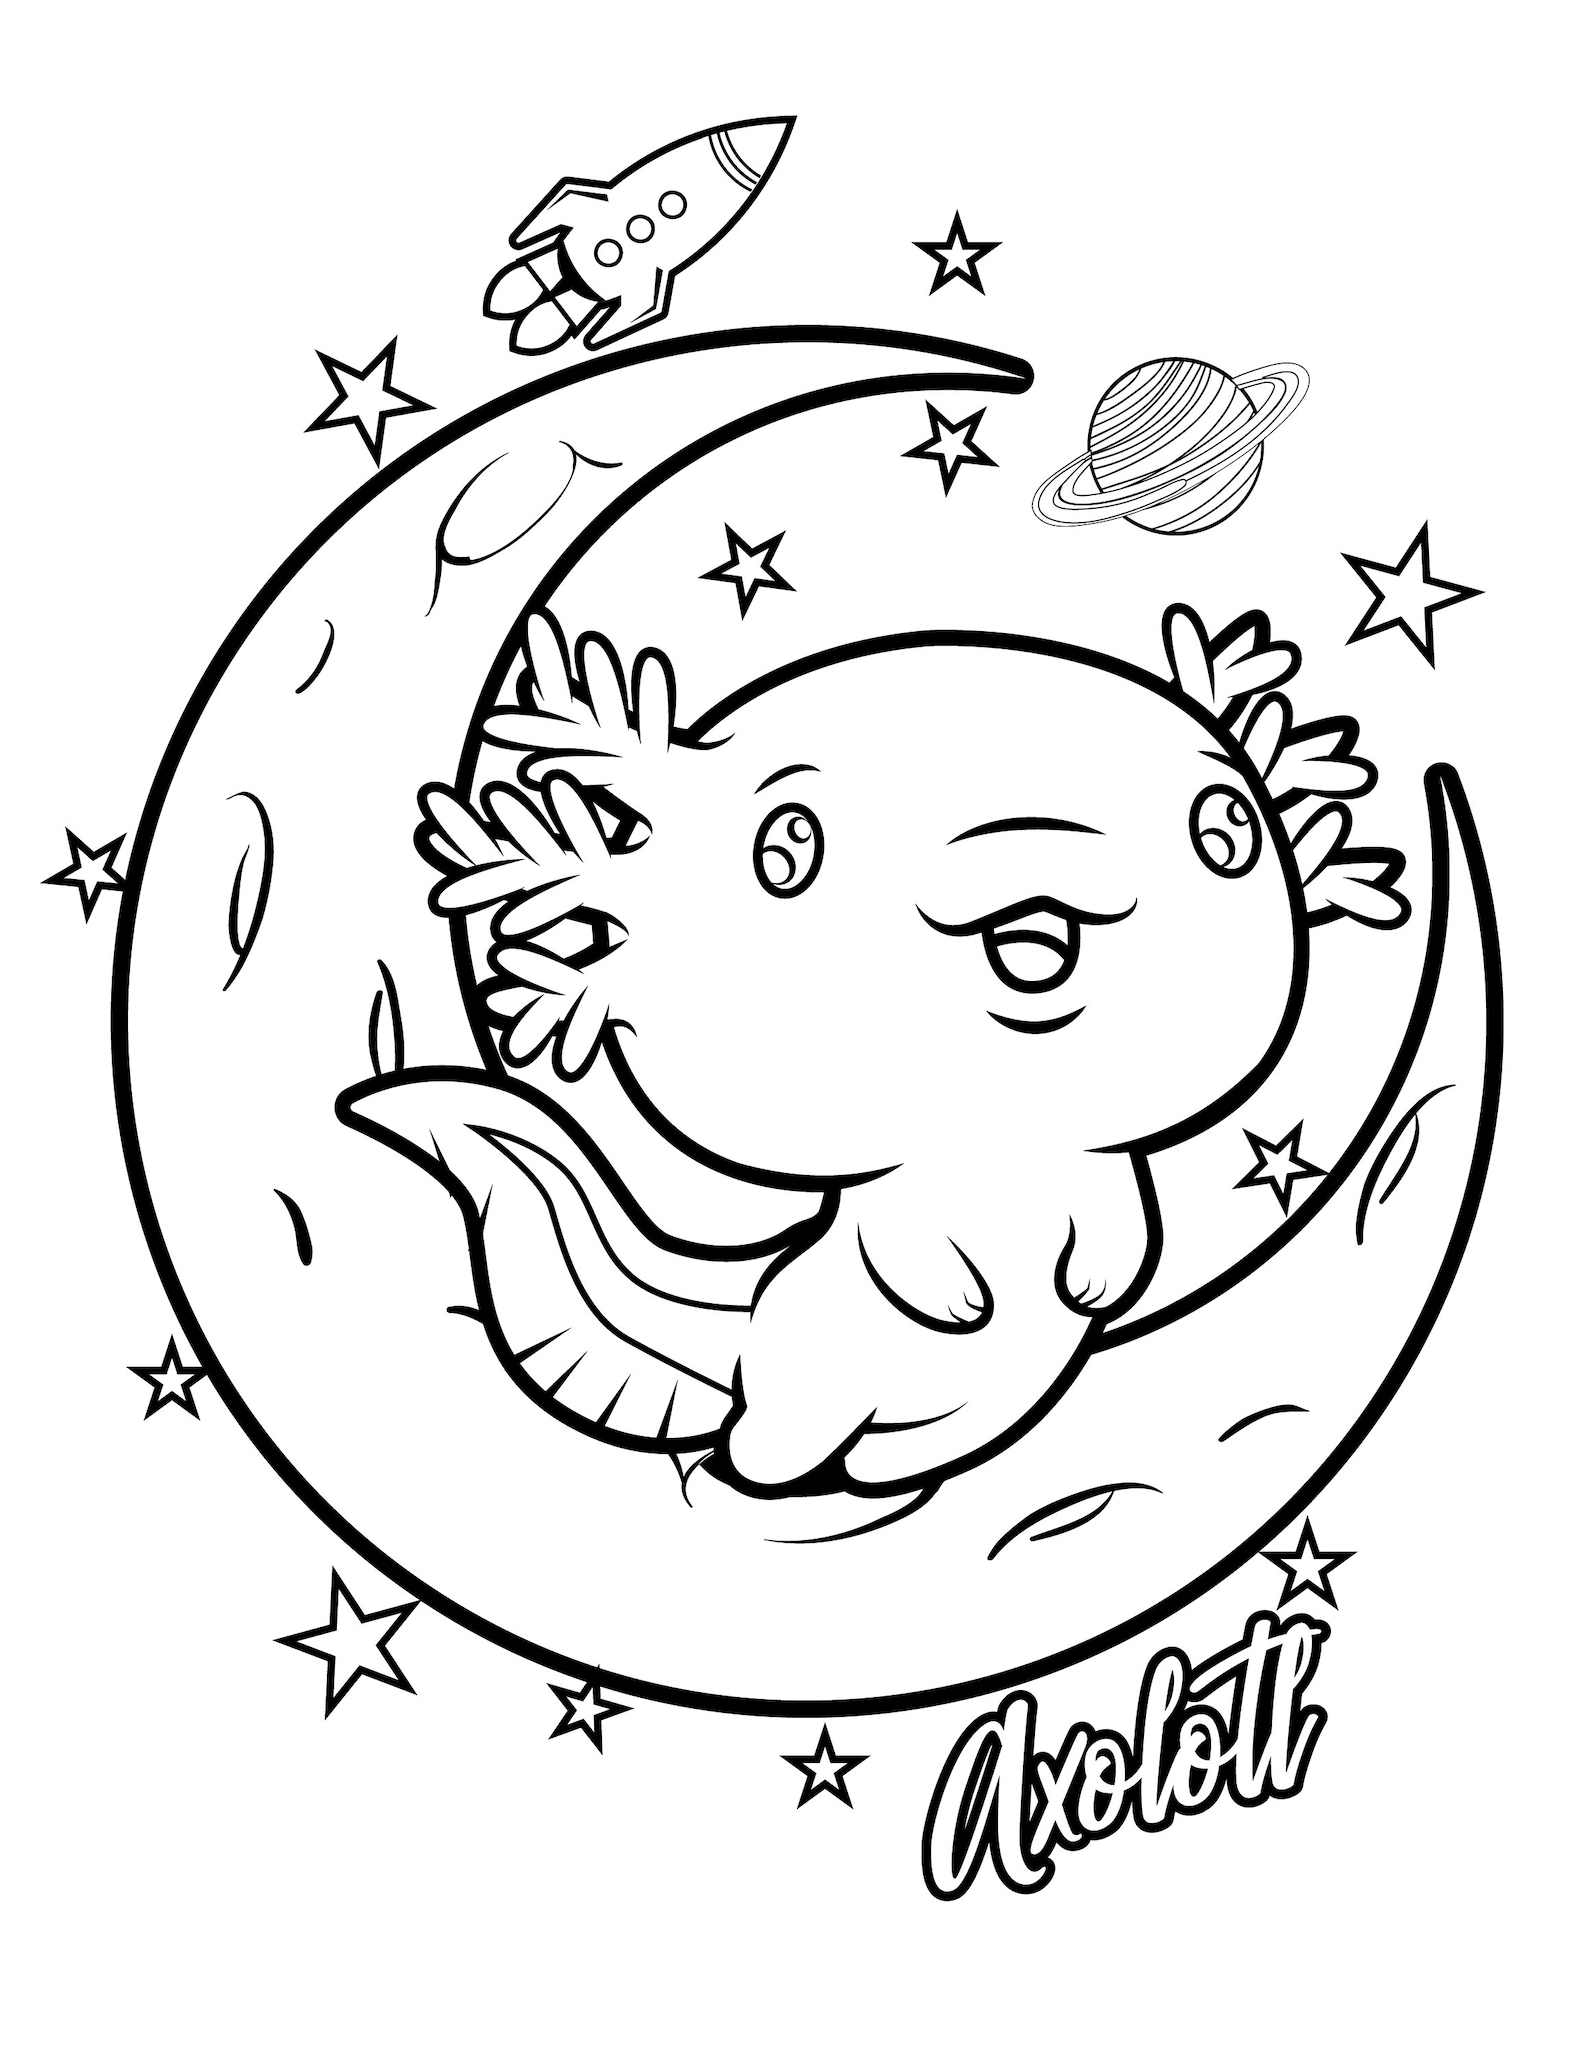 39 Cool Printable Axolotl Coloring Pages 33